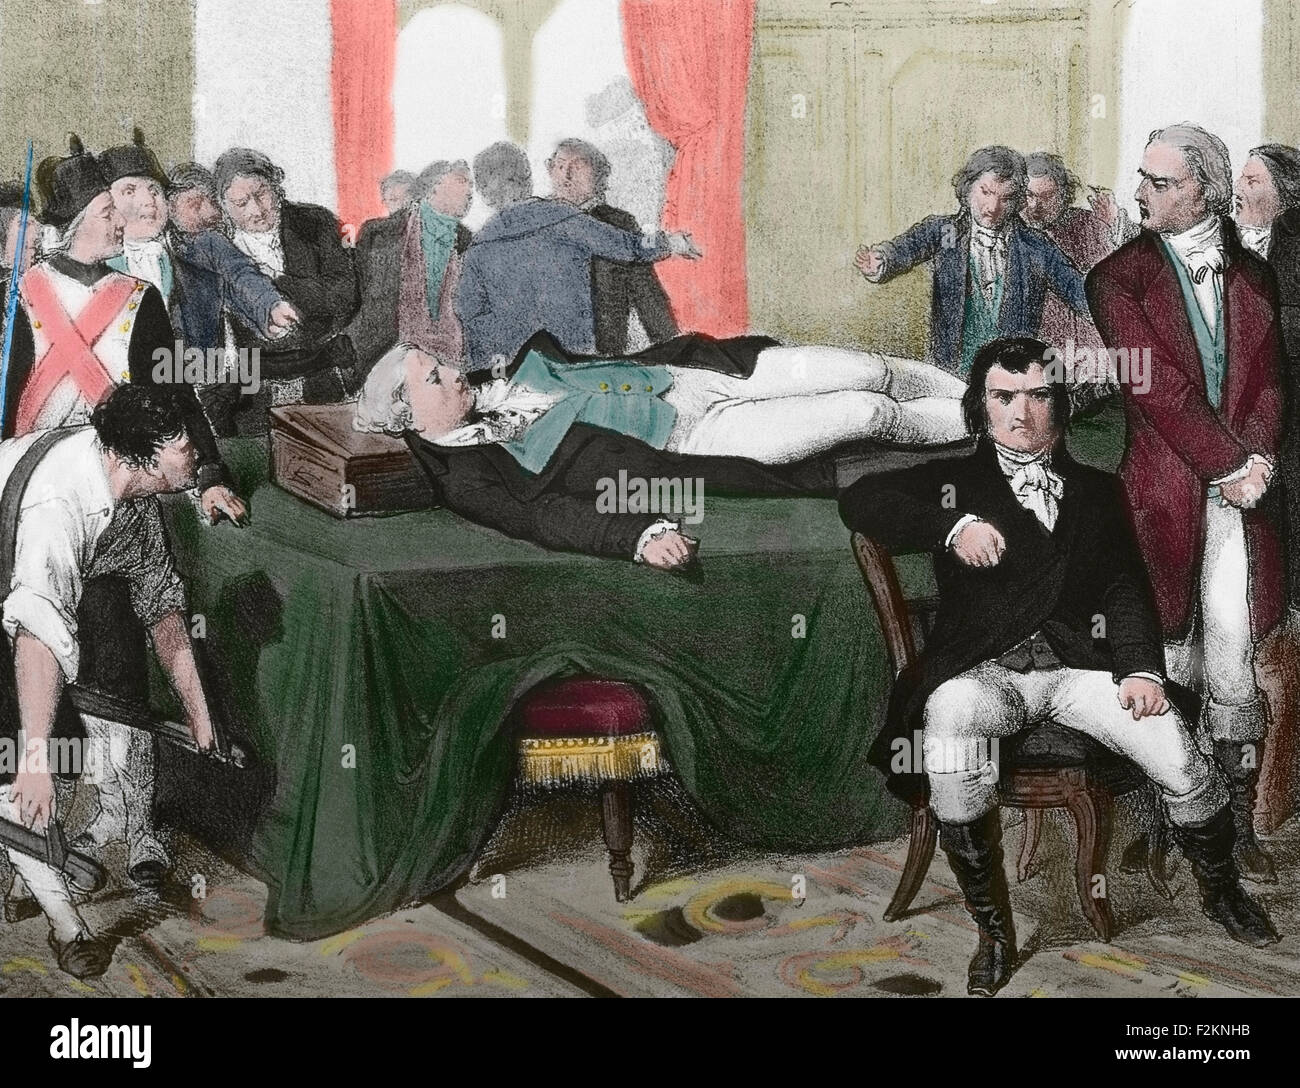 Maximilien Robespierre (1758-1794). French lawyer and politician. Figure of the French Revolution. Member of Jacobin Club. Executed by guillotine, 1794. Corpse exhibited at the Paris City Hall. Colored engraving. Stock Photo